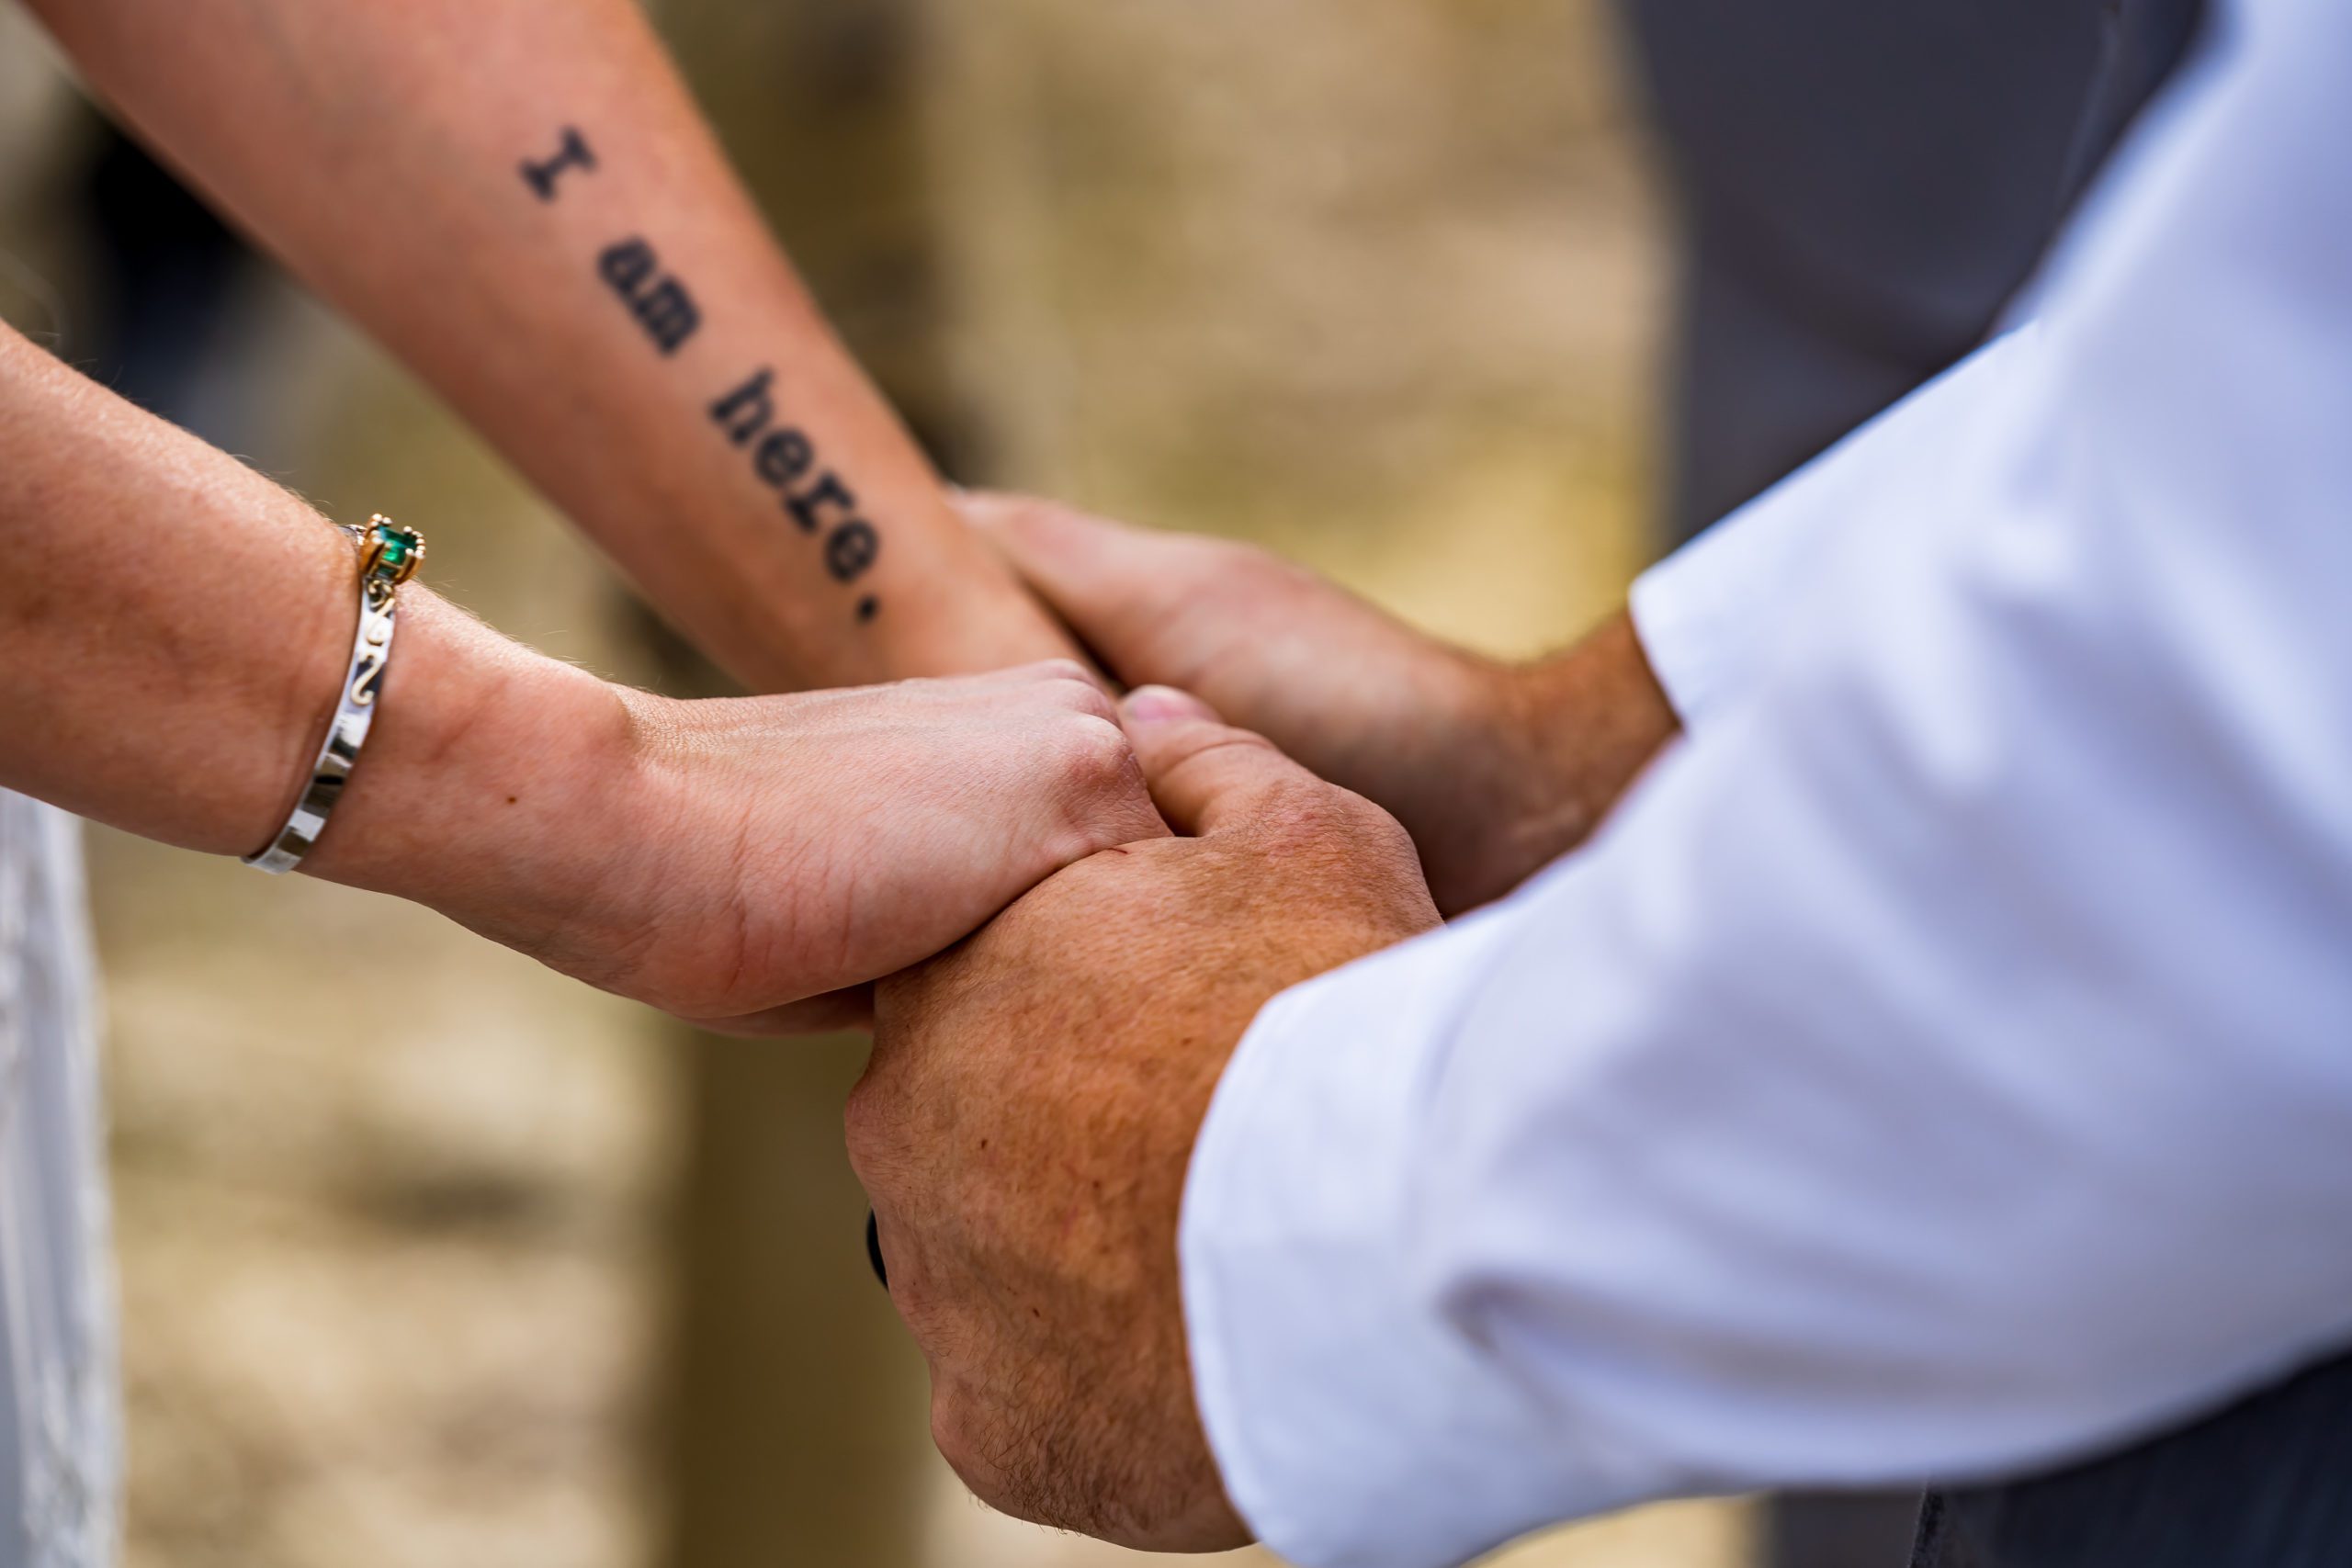 A bride with a tattoo on her arm holds hands with her groom during their backyard wedding ceremony